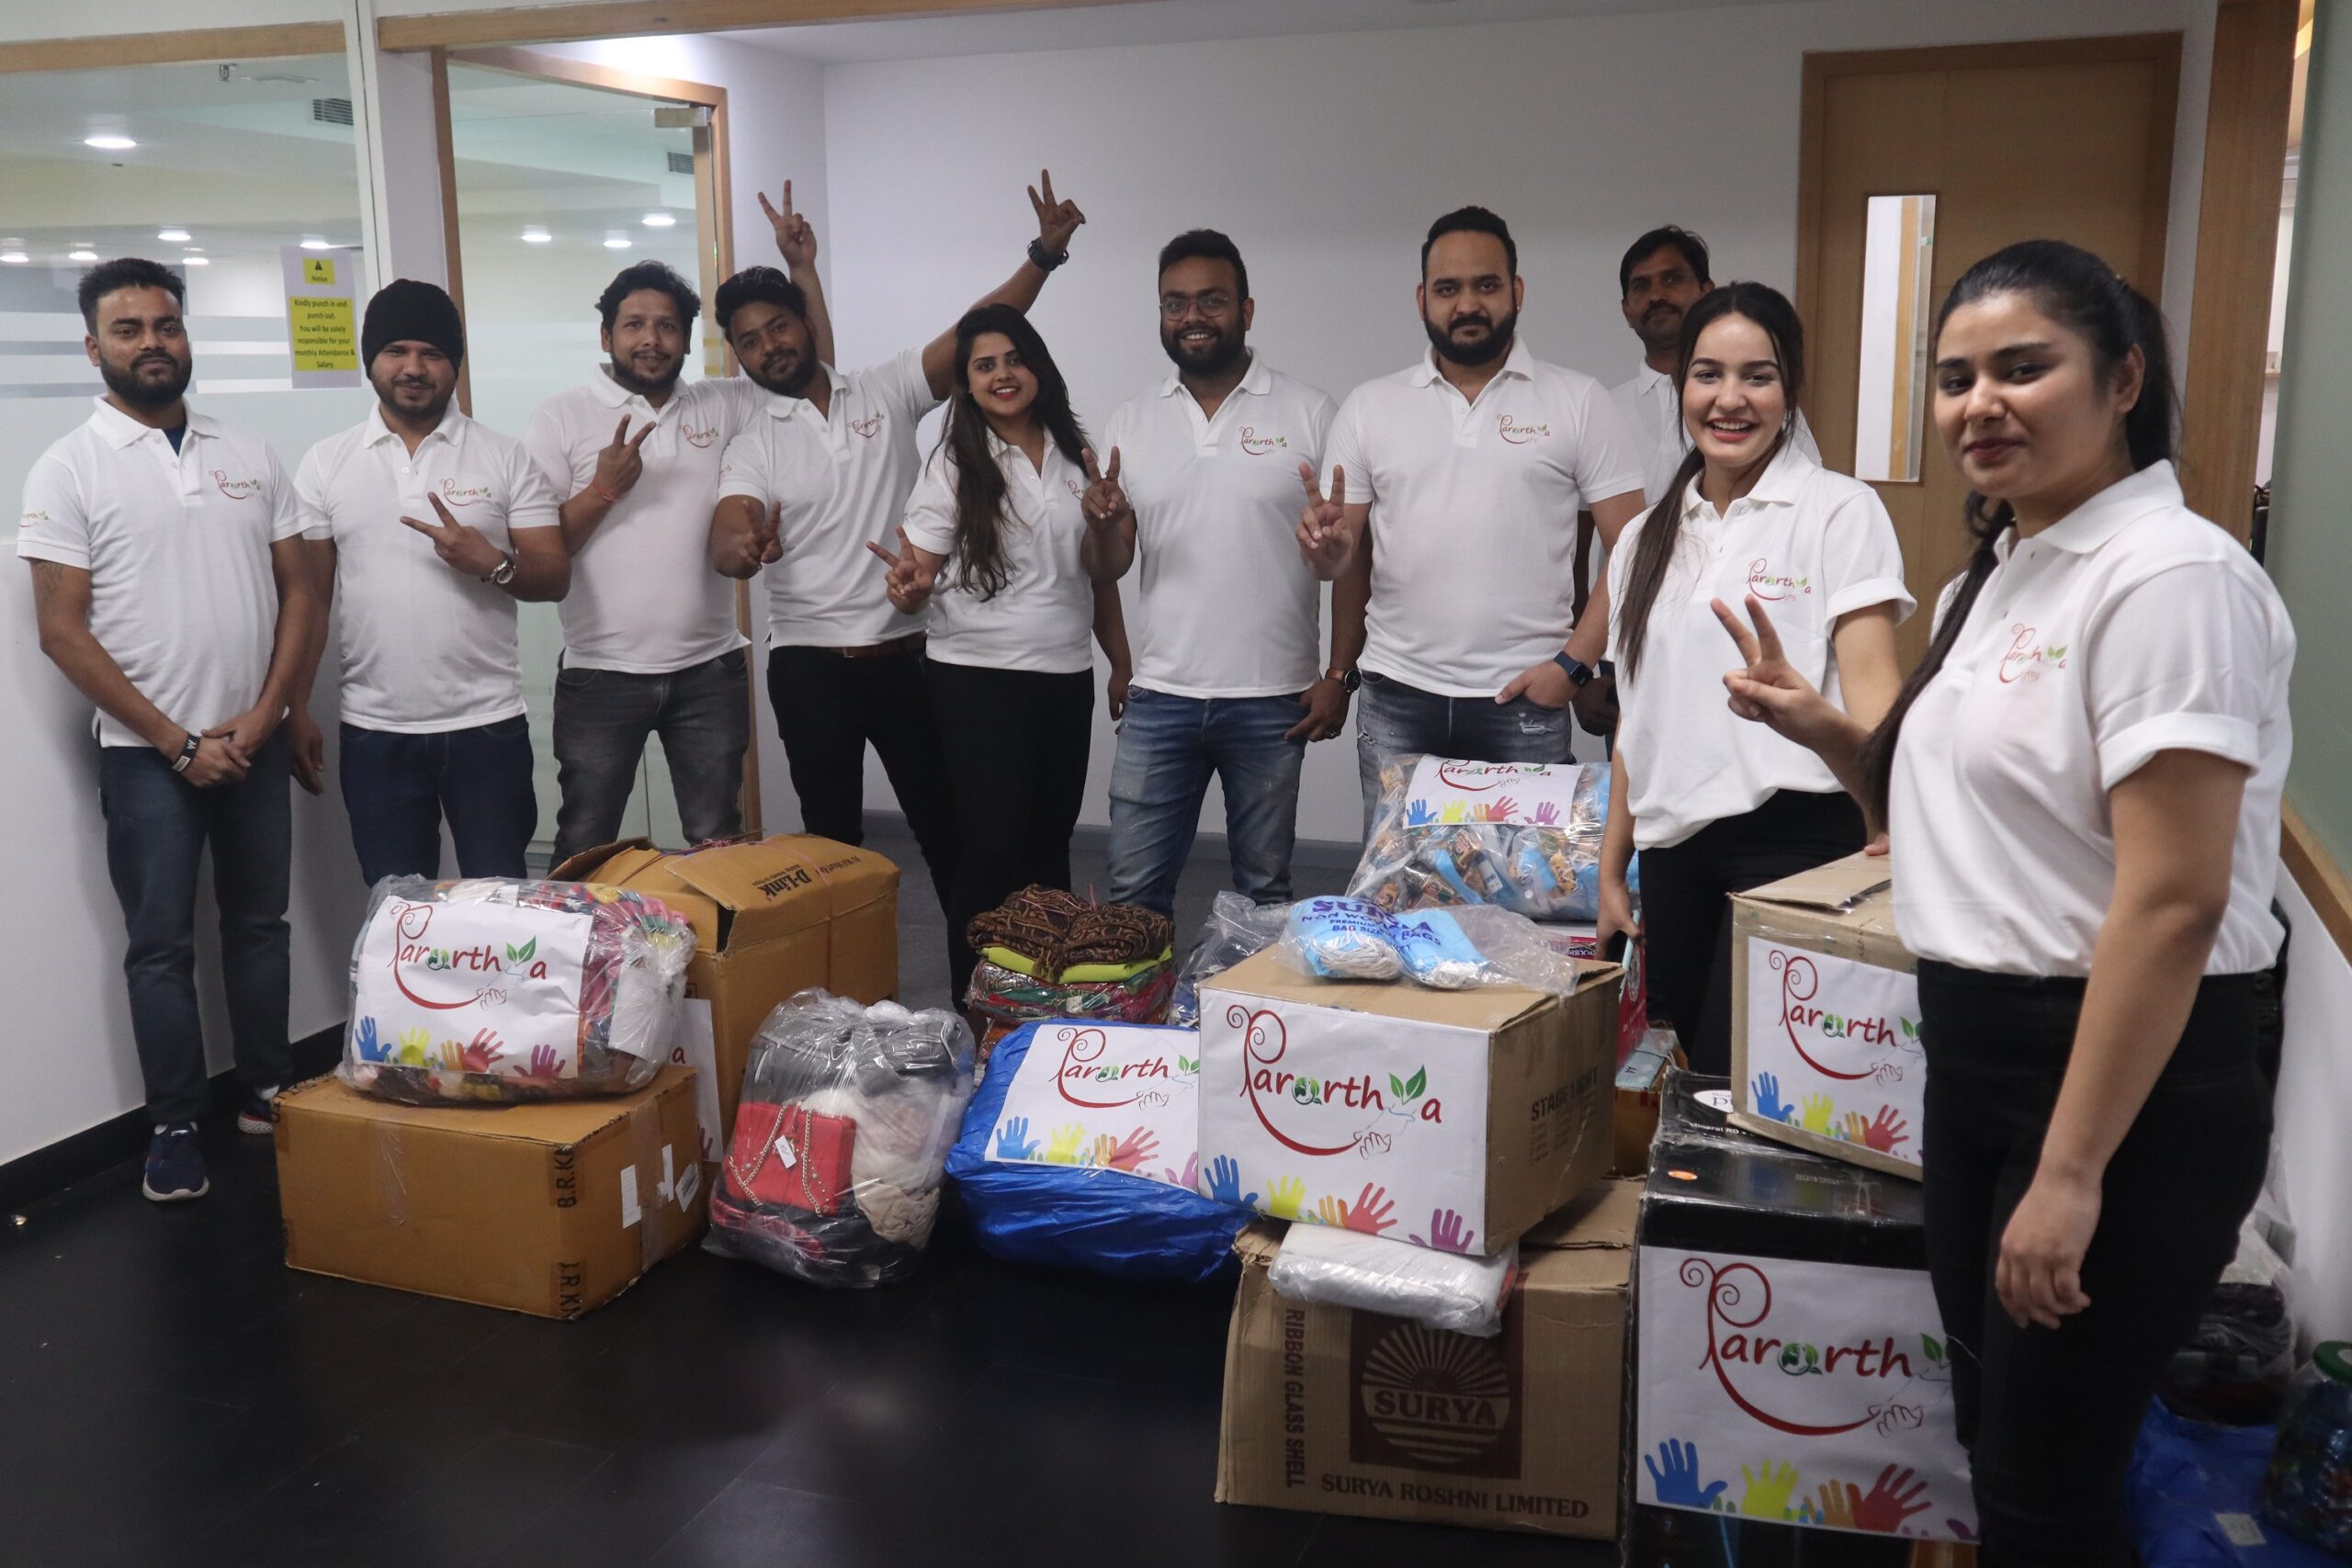 NGO Pararthya’s “Project Rahat” drive to bring relief to migrant workers in DelhiNCR